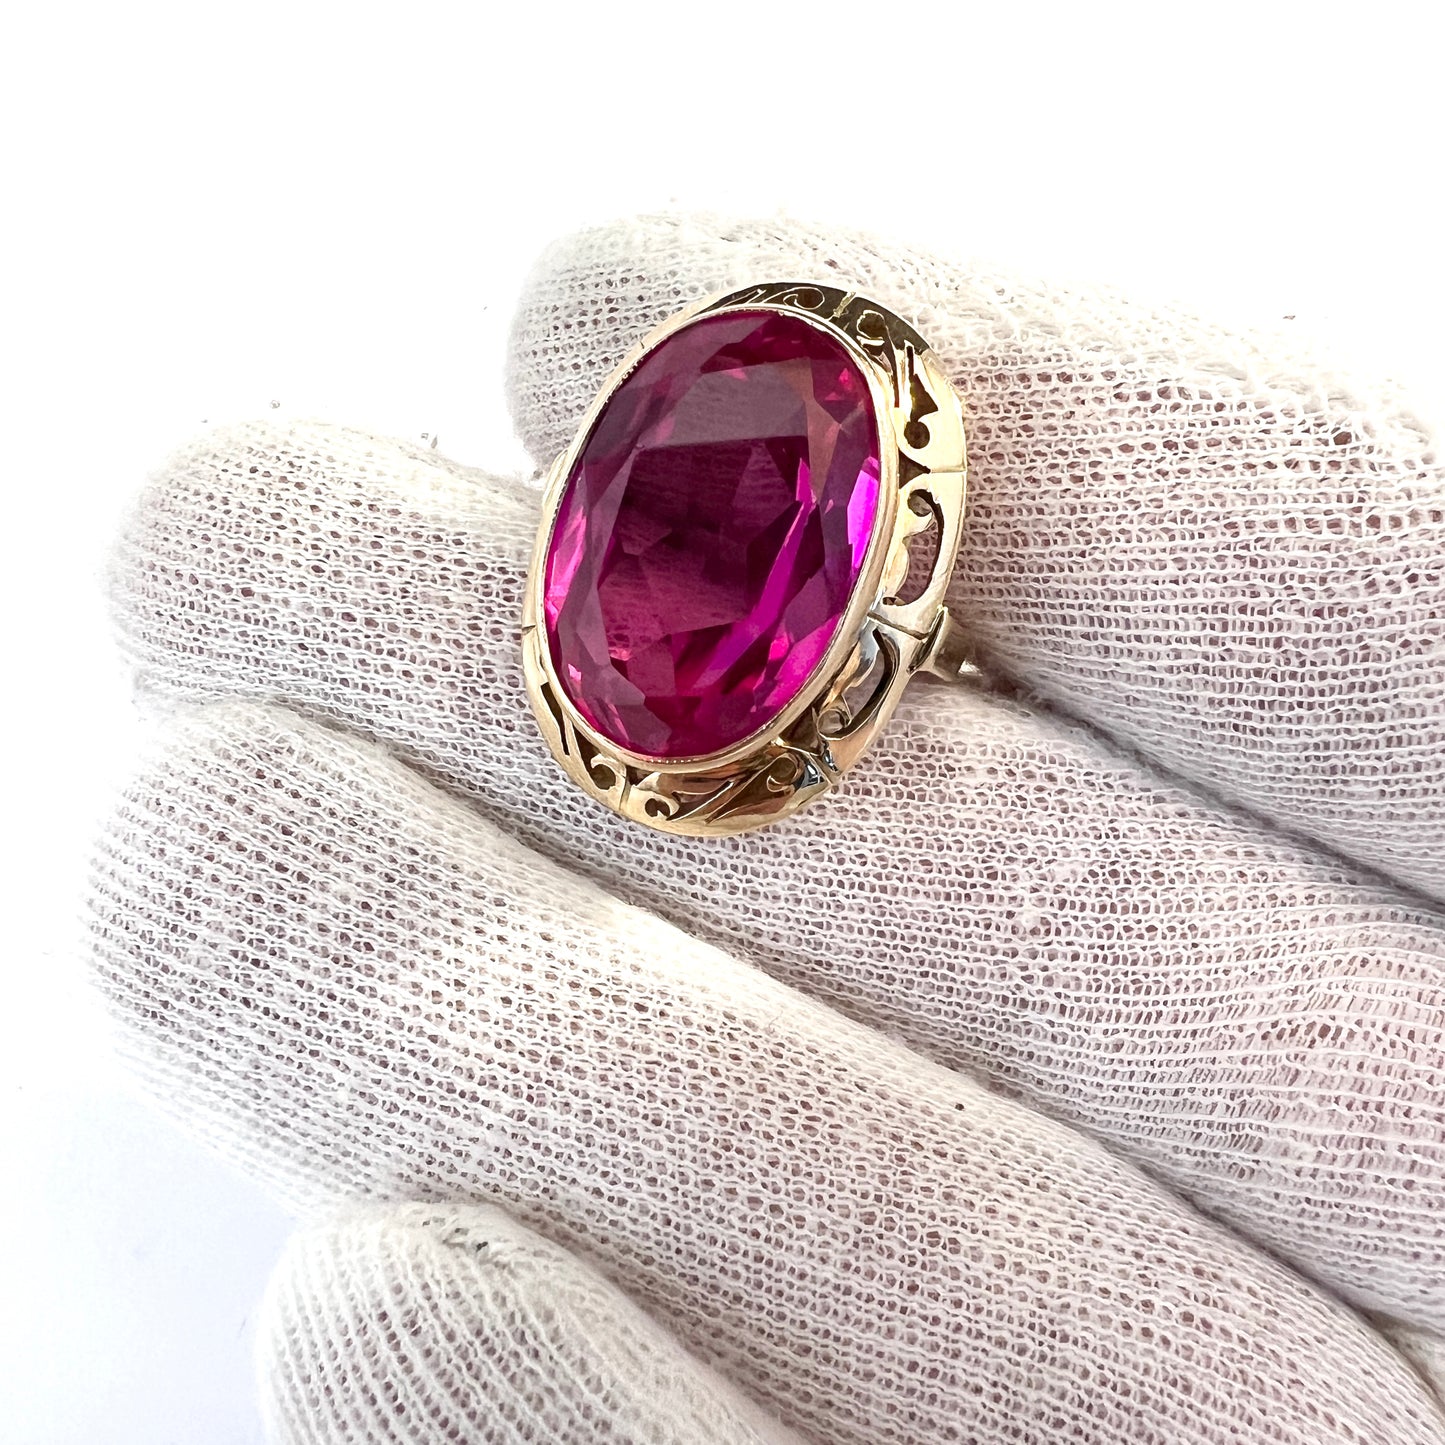 Poland c 1960s. Bold Vintage 14k Gold Synthetic Sapphire Ring.